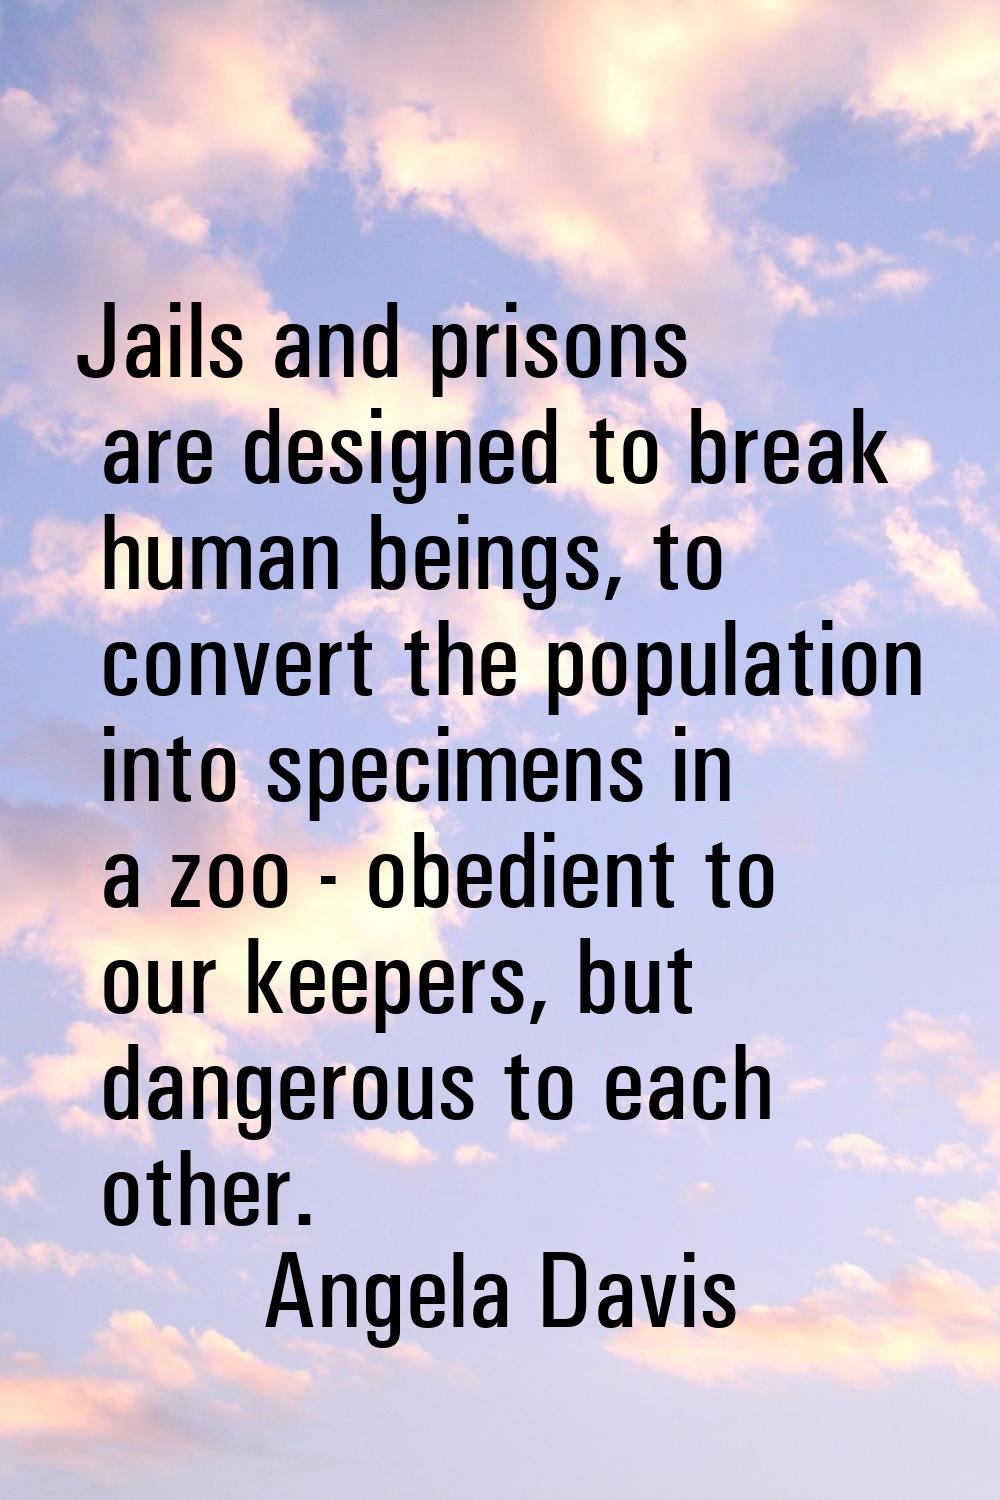 Jails and prisons are designed to break human beings, to convert the population into specimens in a